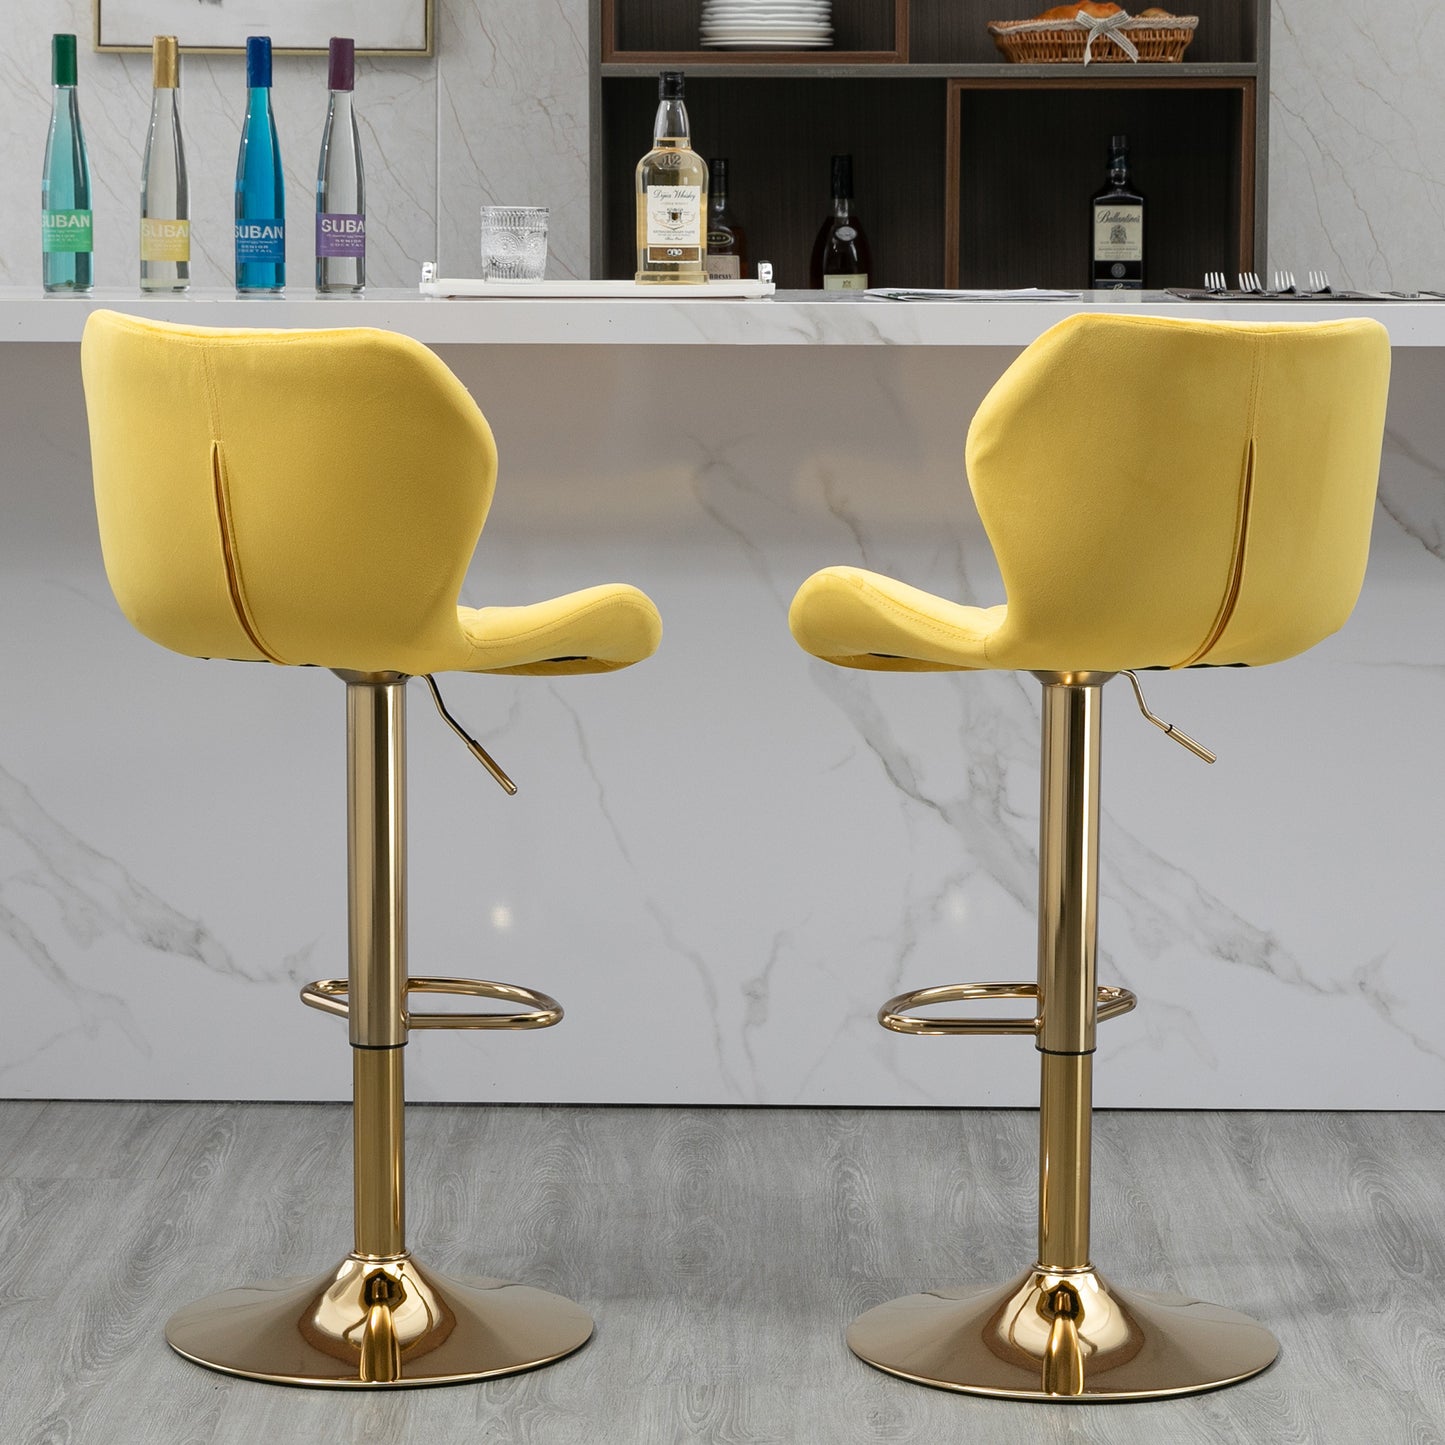 Yellow Velvet Adjustable Swivel Bar Stools Set Of 2 Modern Counter Height Barstools With Golden Color Base - Enova Luxe Home Store